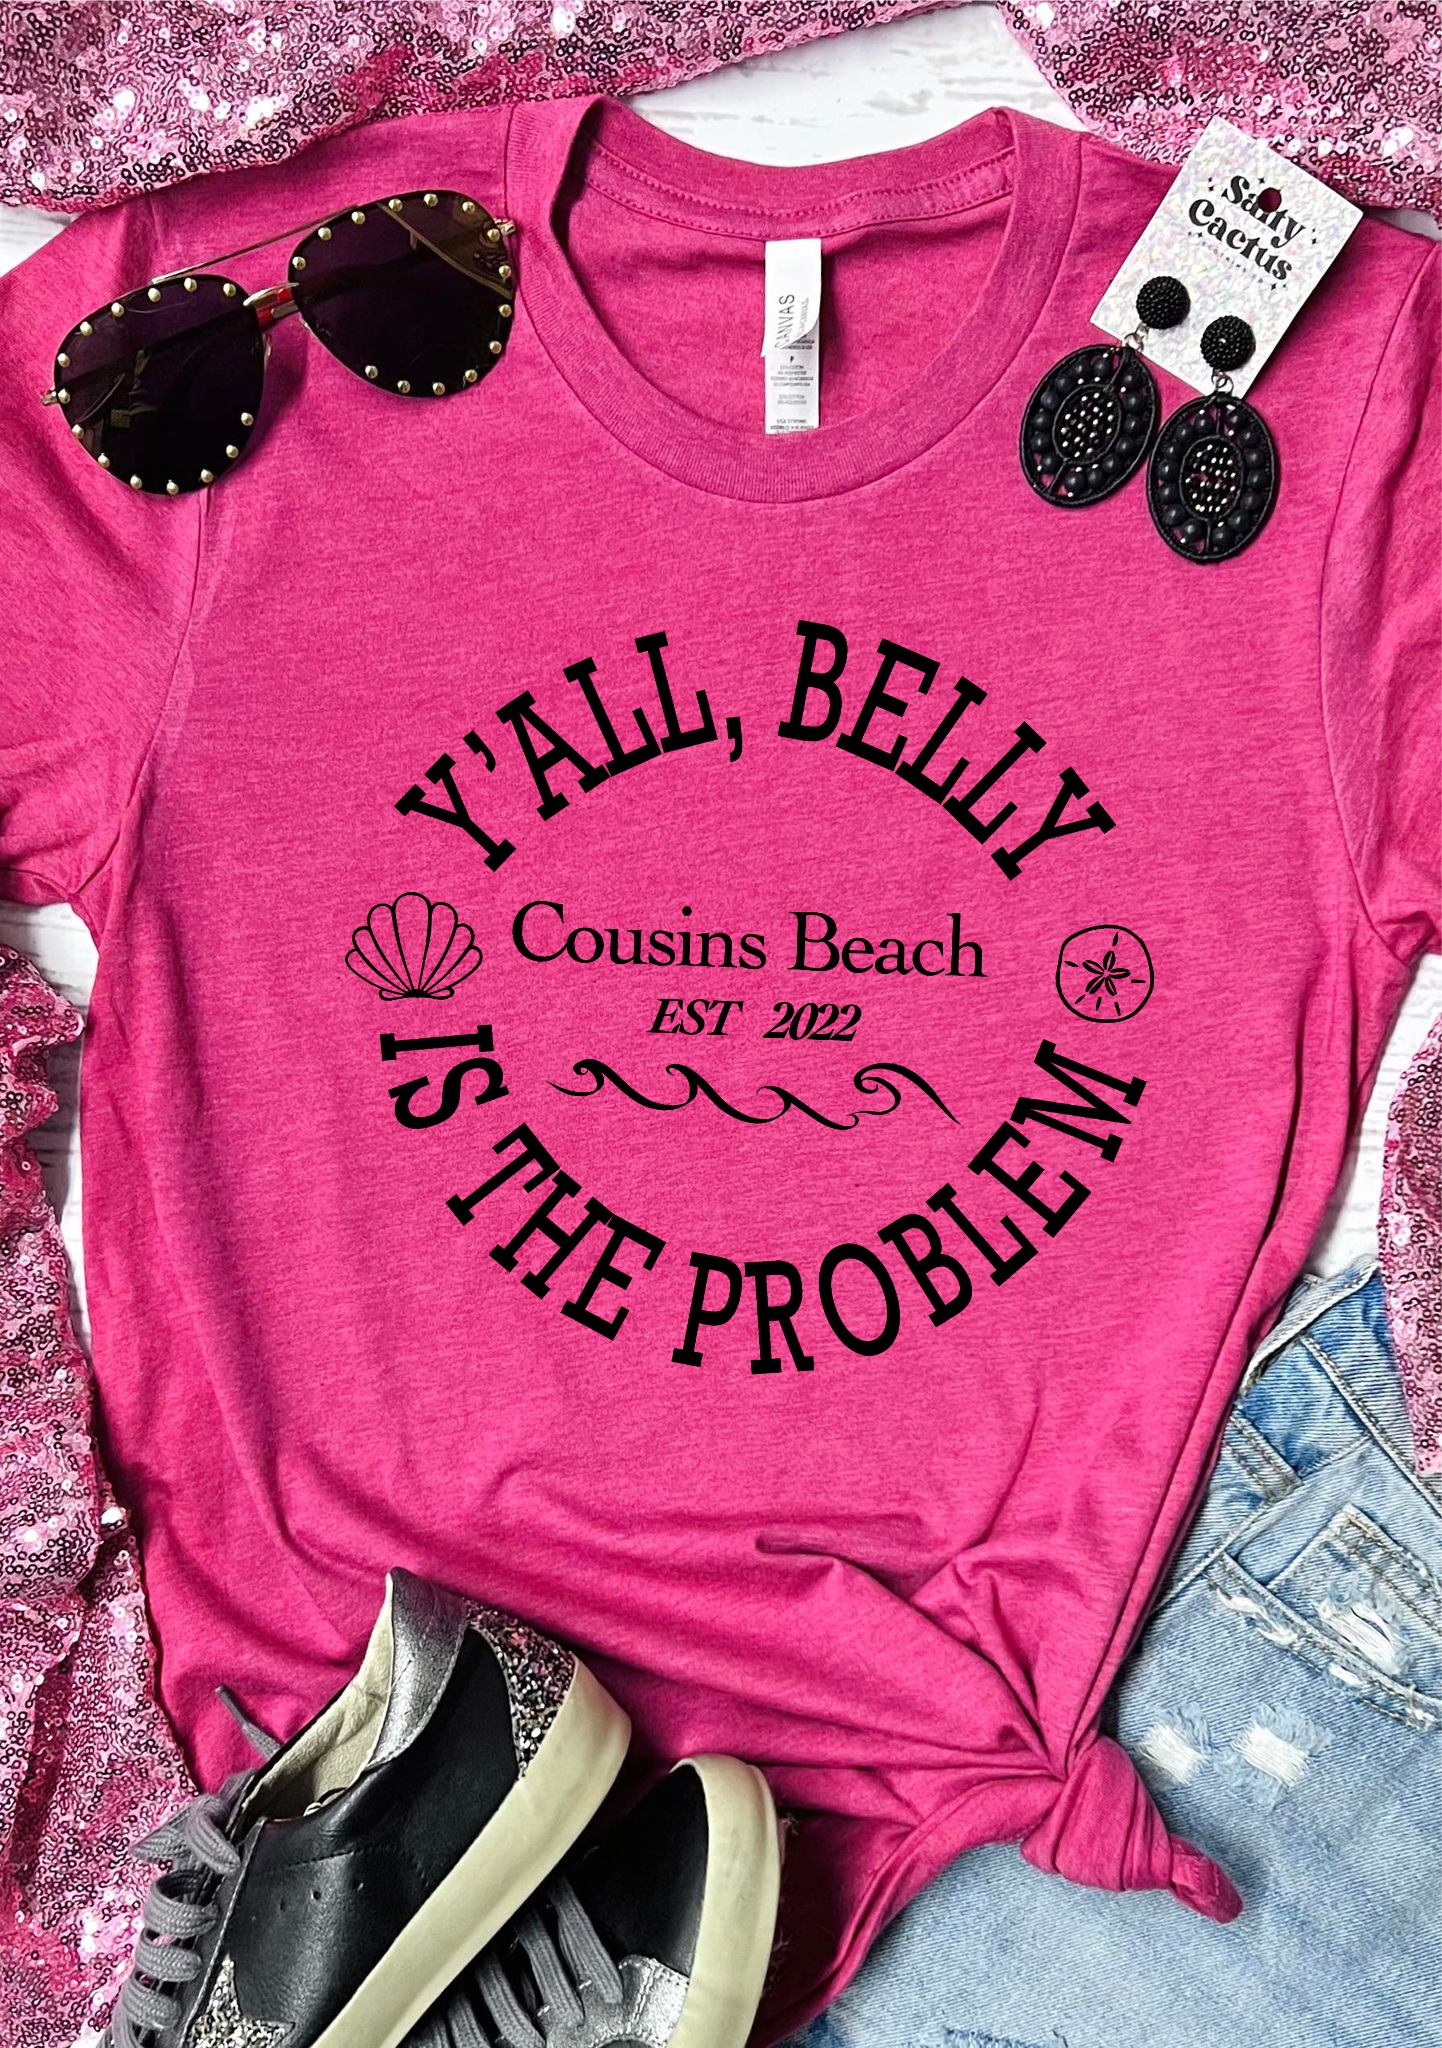 Ya'll Belly Is The Problem Pink Bella Tee